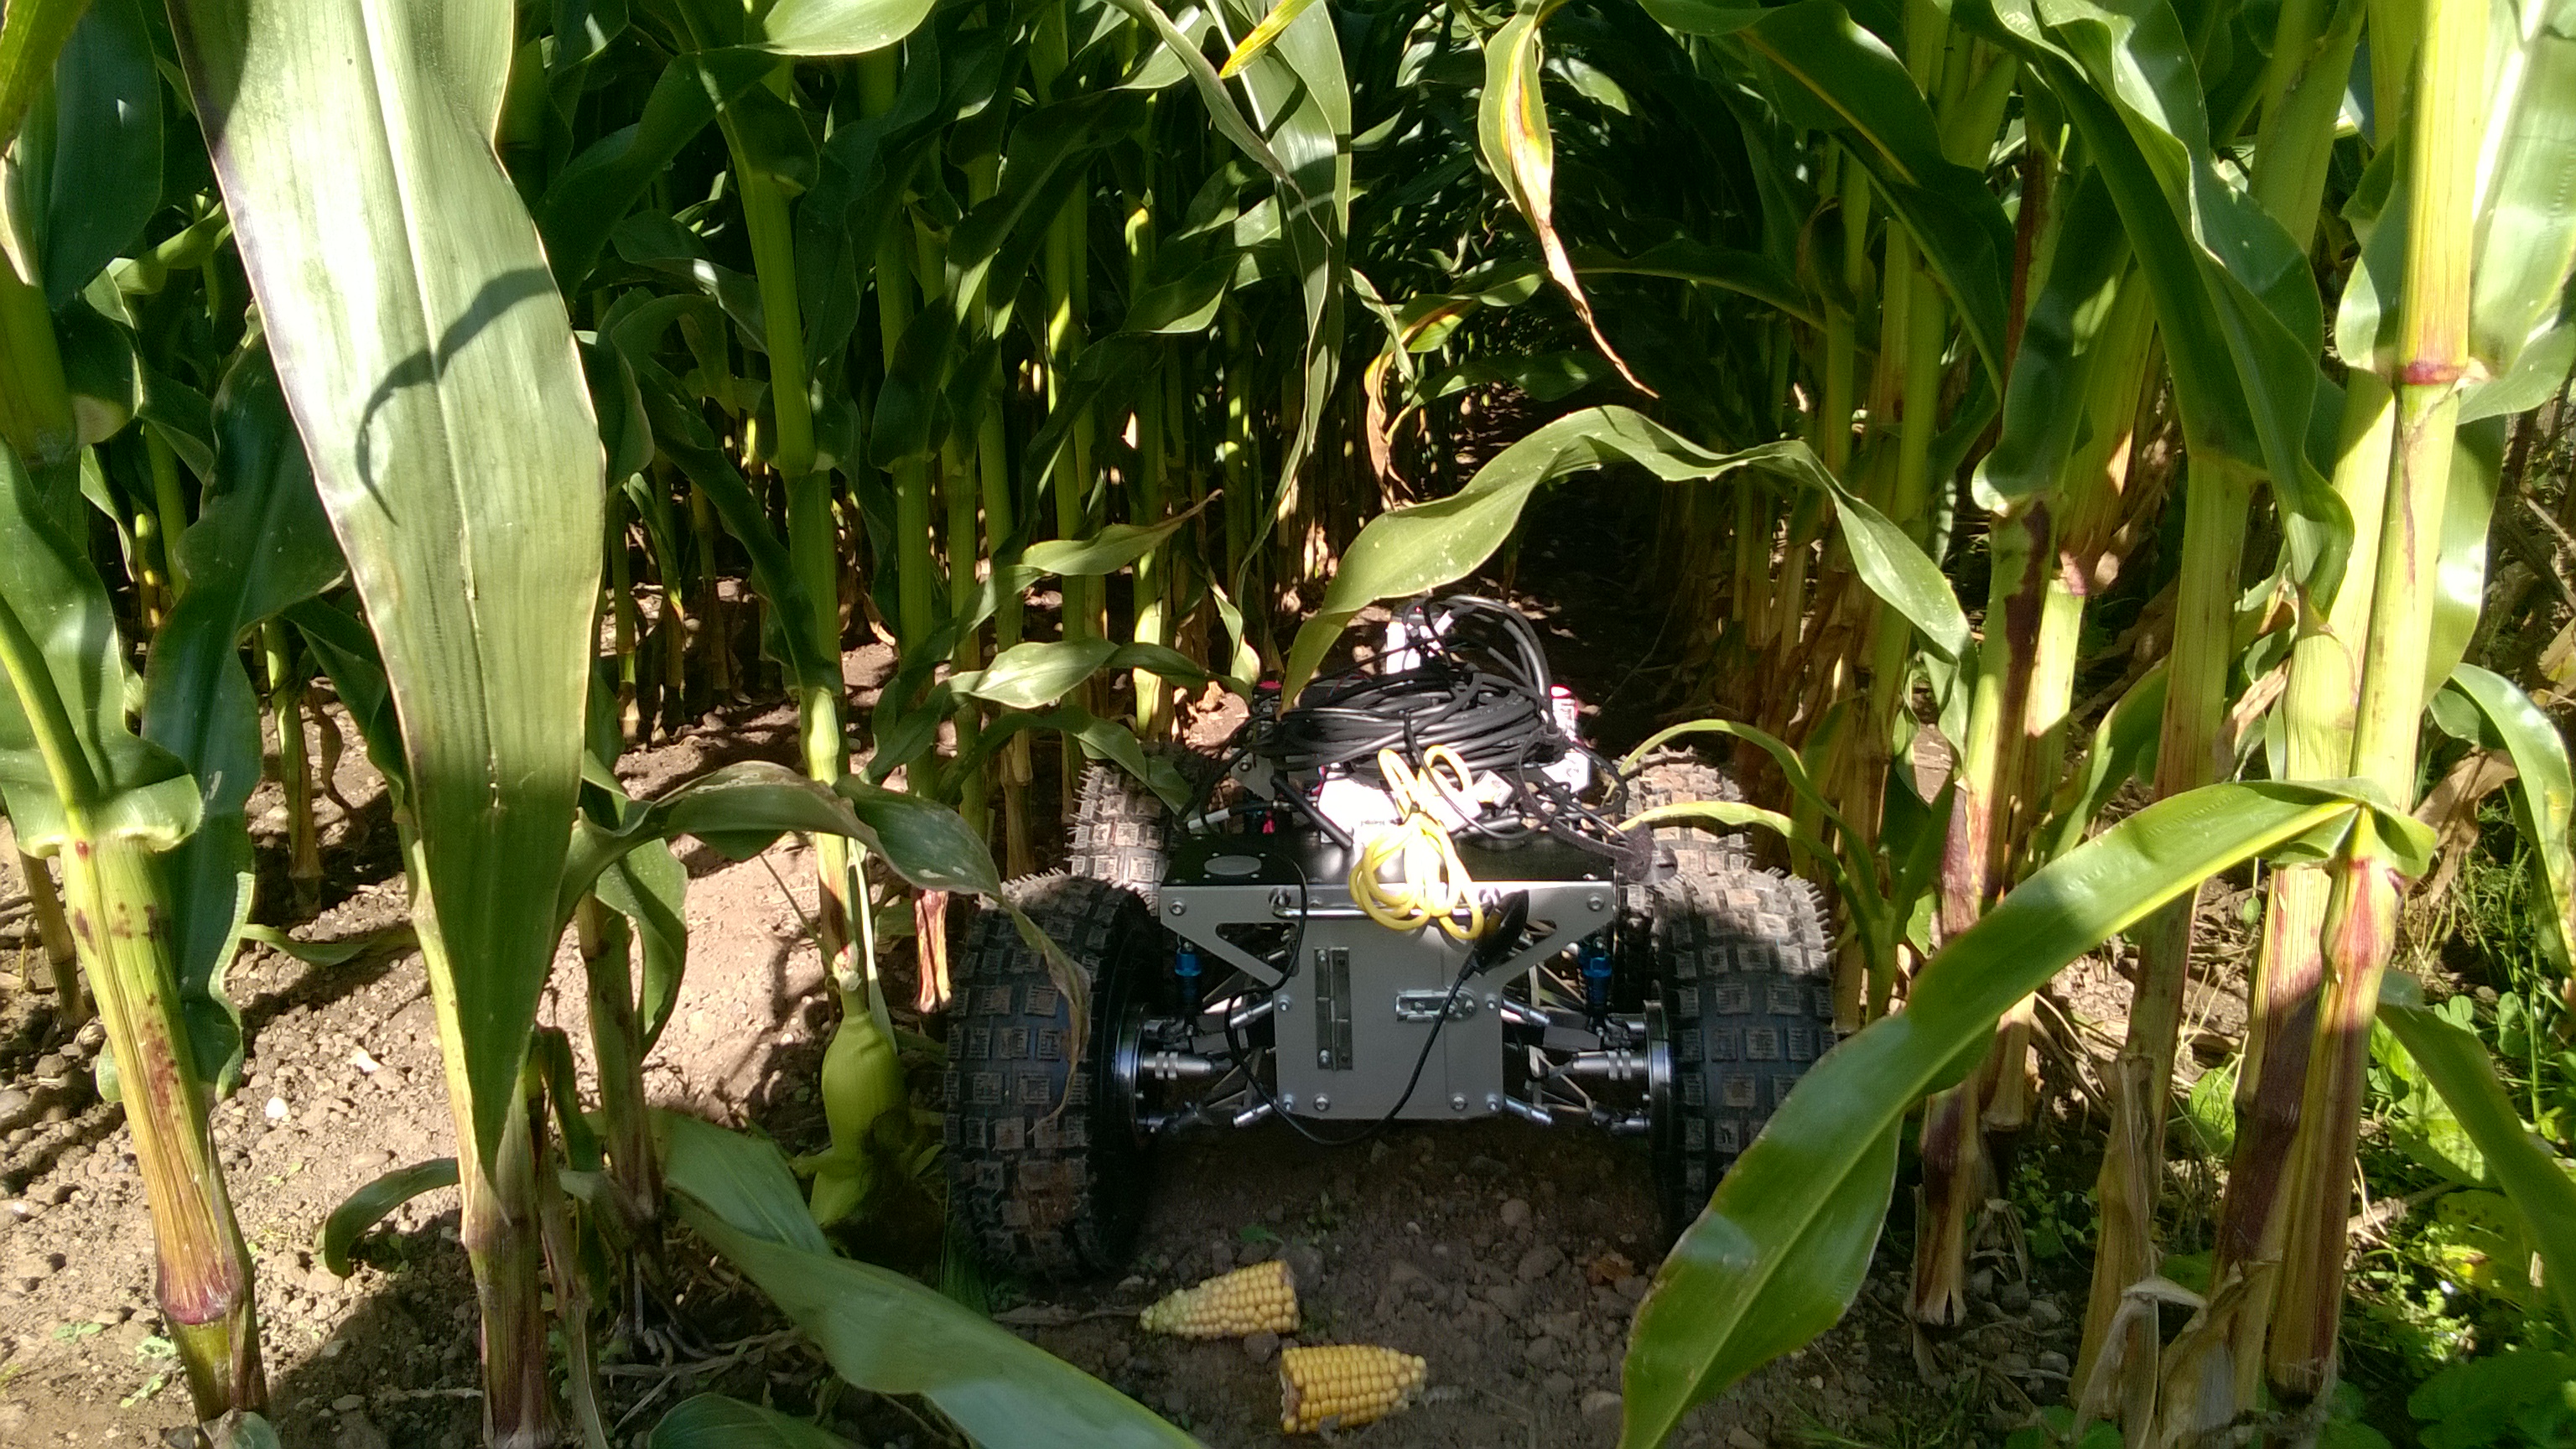 Newton Robot Leafeon in maize field going down between the rows during navigation tests at University of Harper Adams in 2015.jpg